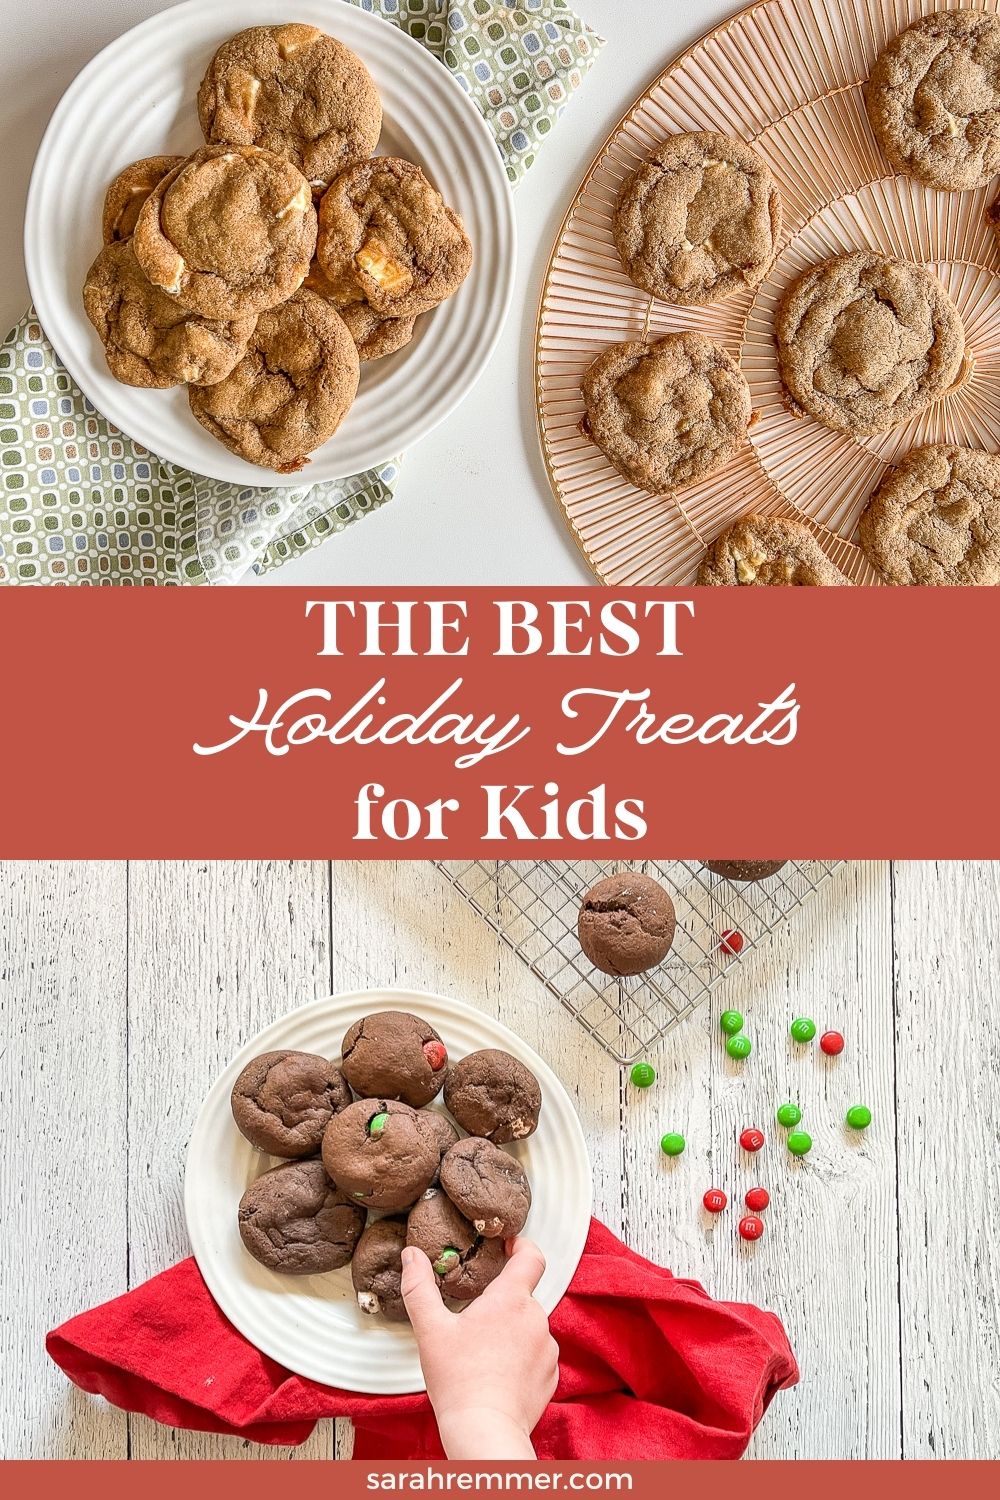 As a dietitian and mom of 3 (and baking lover), I’ve gathered my most loved, kid-friendly holiday treats and snacks for you to try! Grab your kiddos, turn on some Christmas carols and dig in!